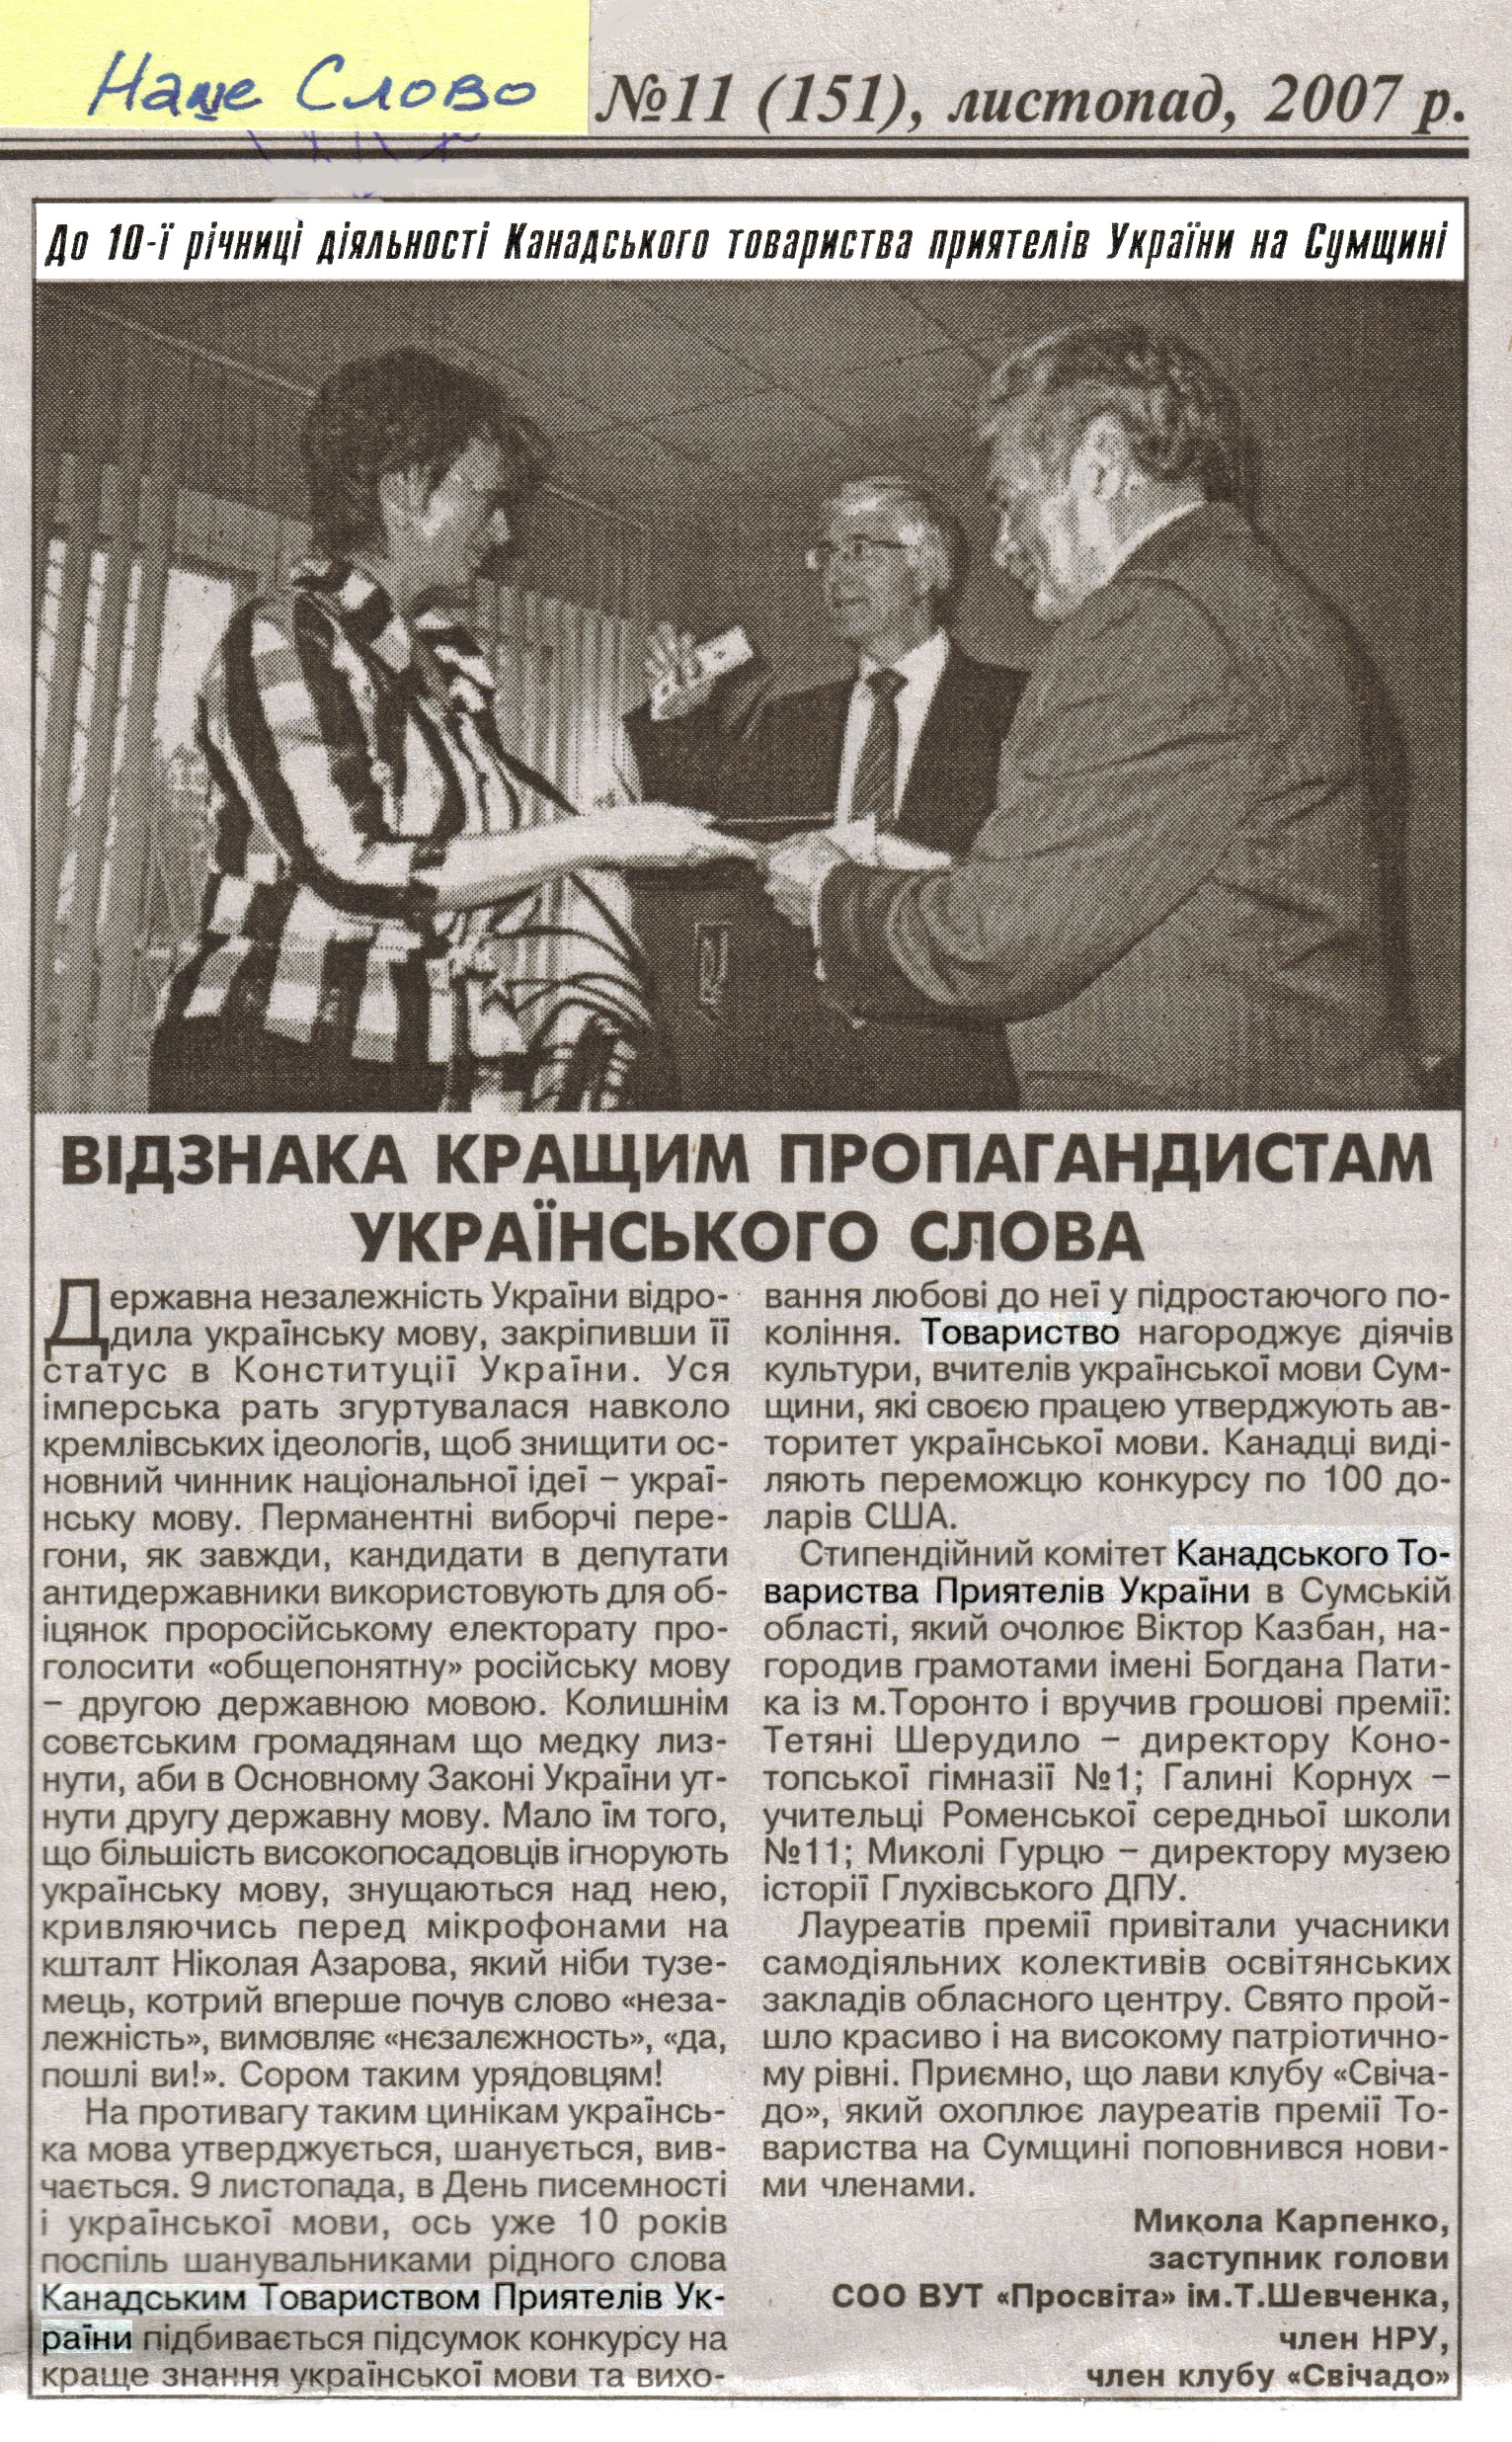 Nashe Slovo article on Canadian Friends of Ukraine Teachers Awards Project in Sumy.